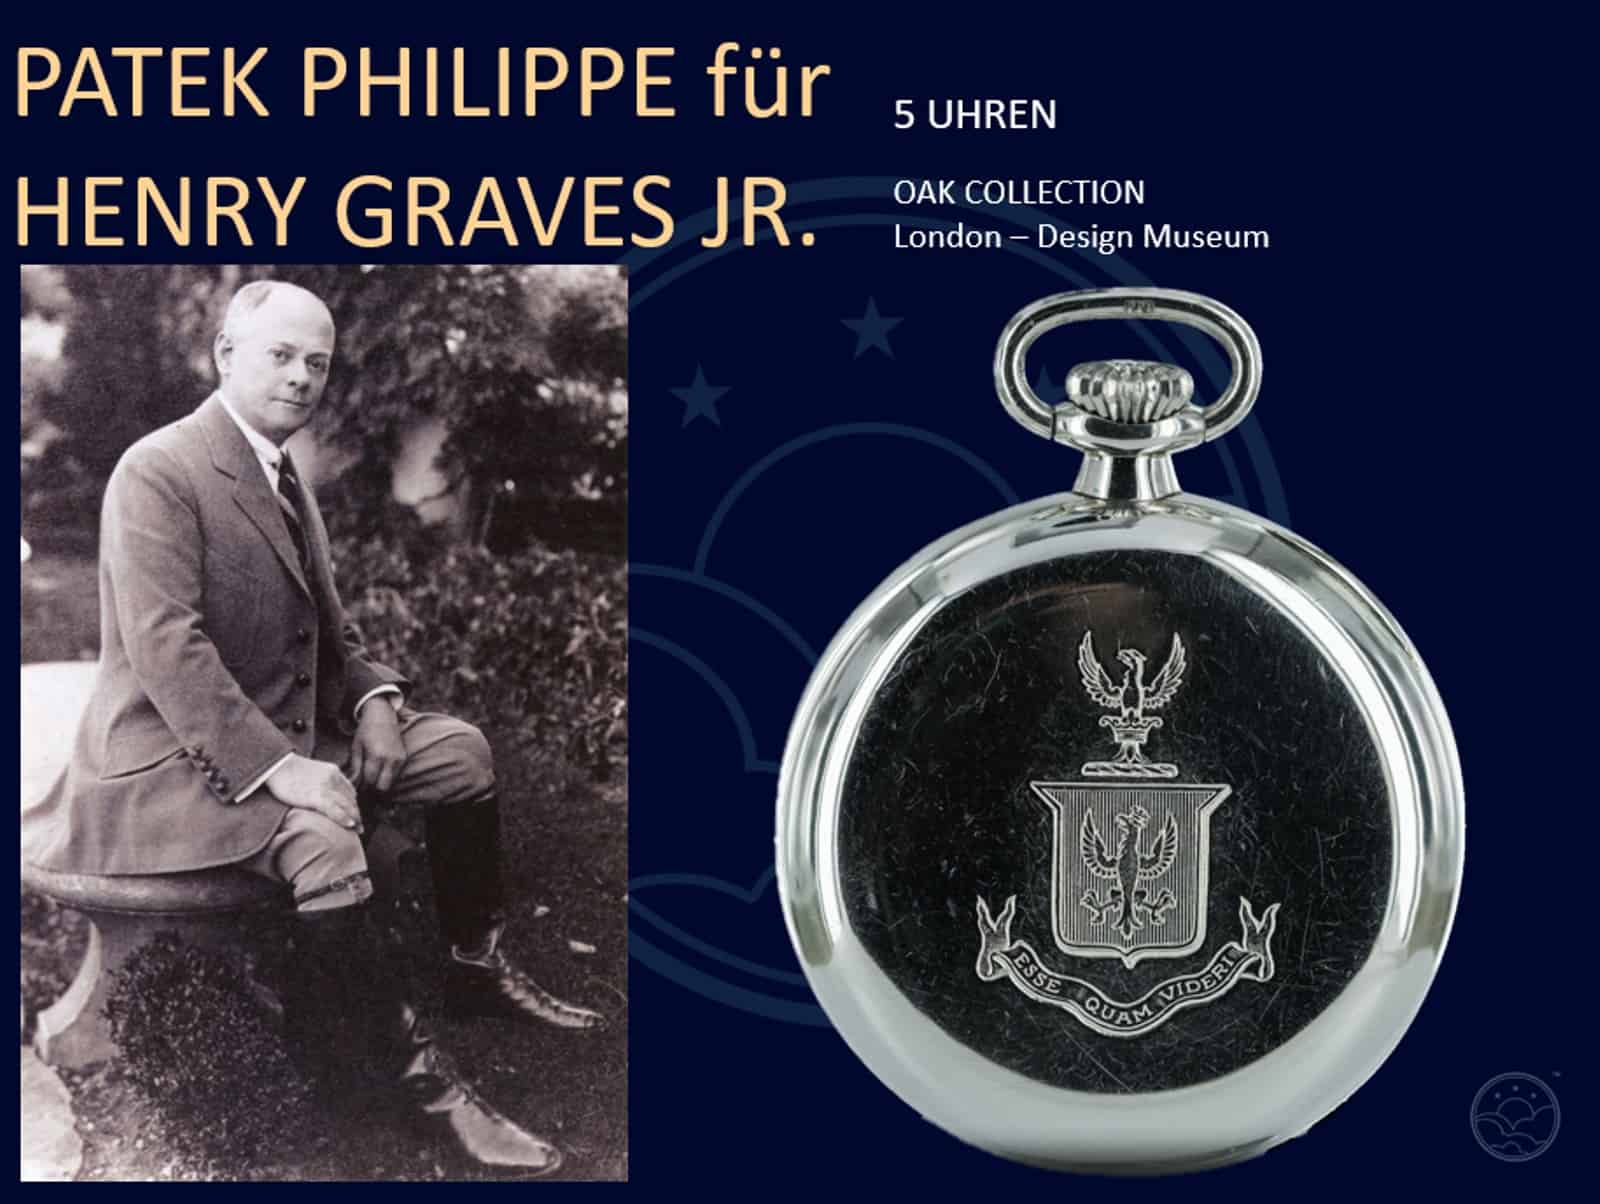 The OAK Collection Patek Philippe fuer Henry Graves Jr